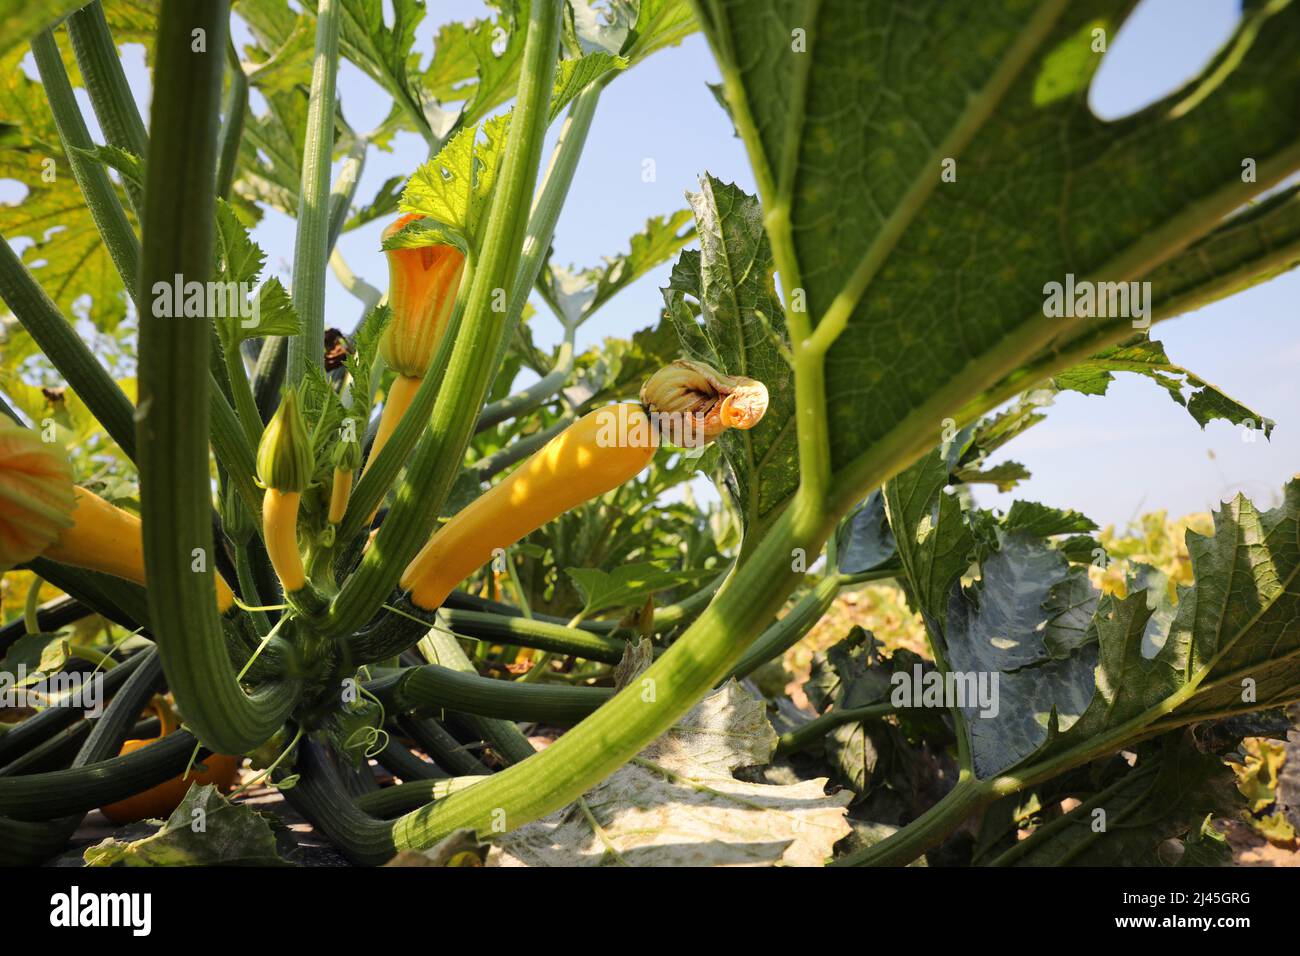 Yellow courgette seedlings in a vegetable-growing farm Stock Photo